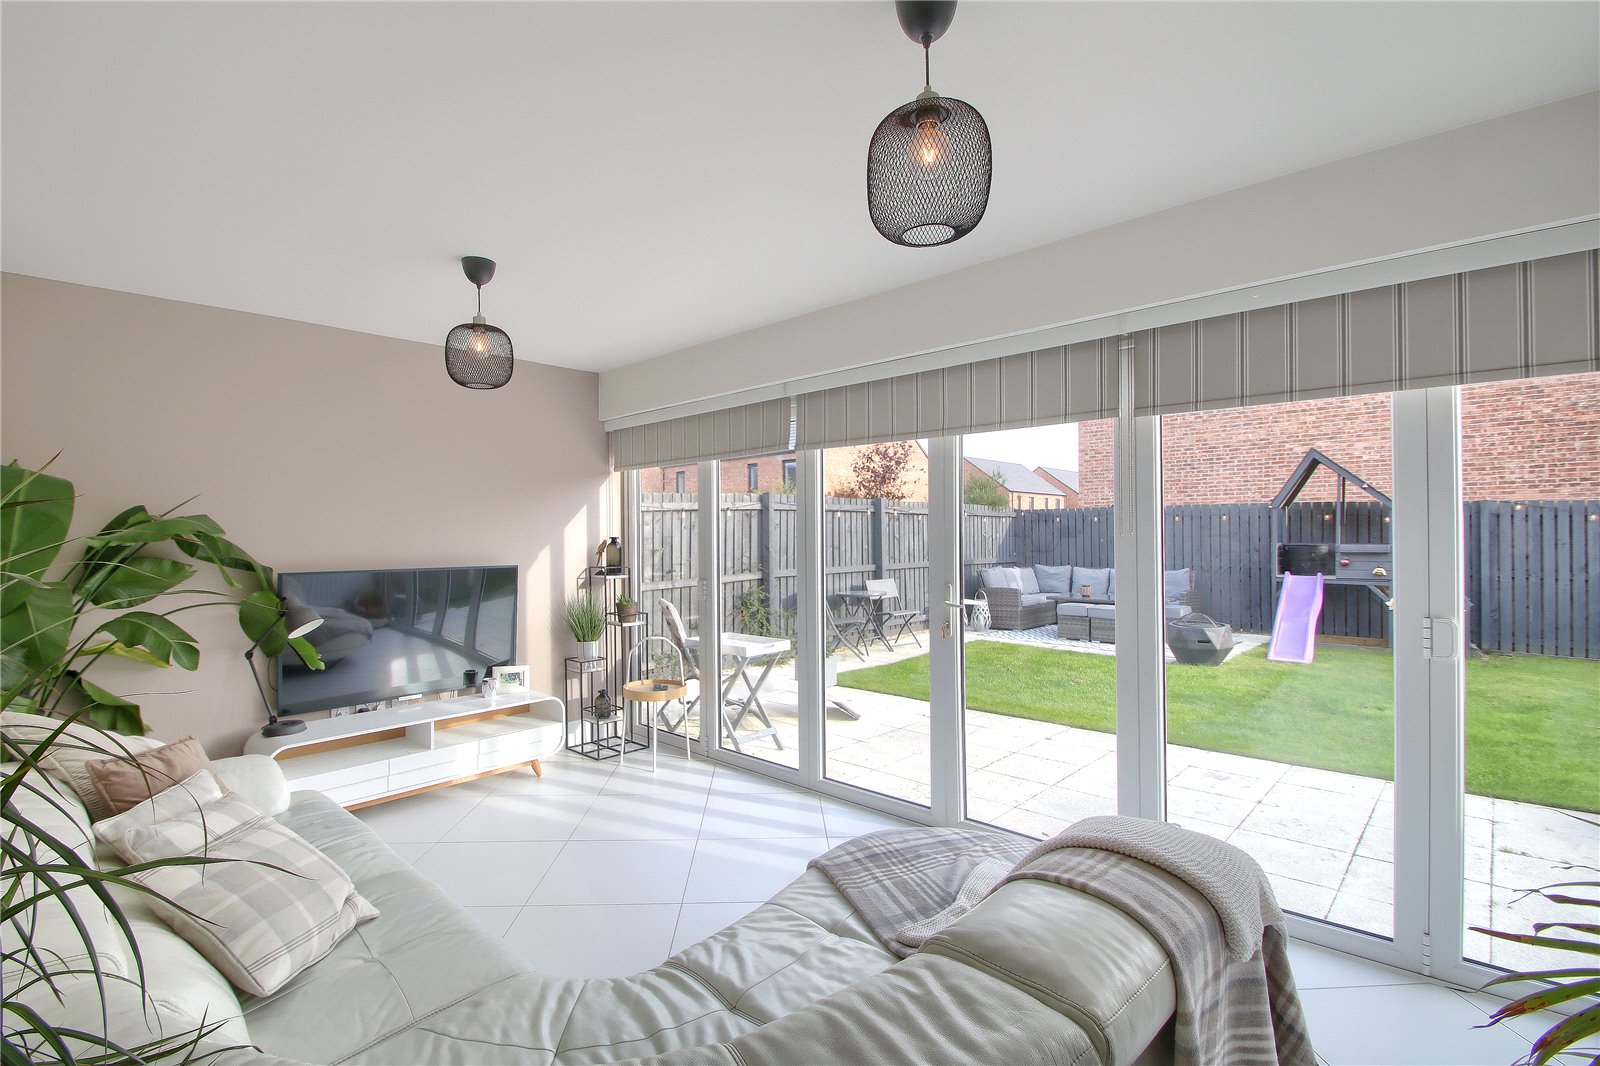 4 bed house for sale in Elms Way, Yarm 2